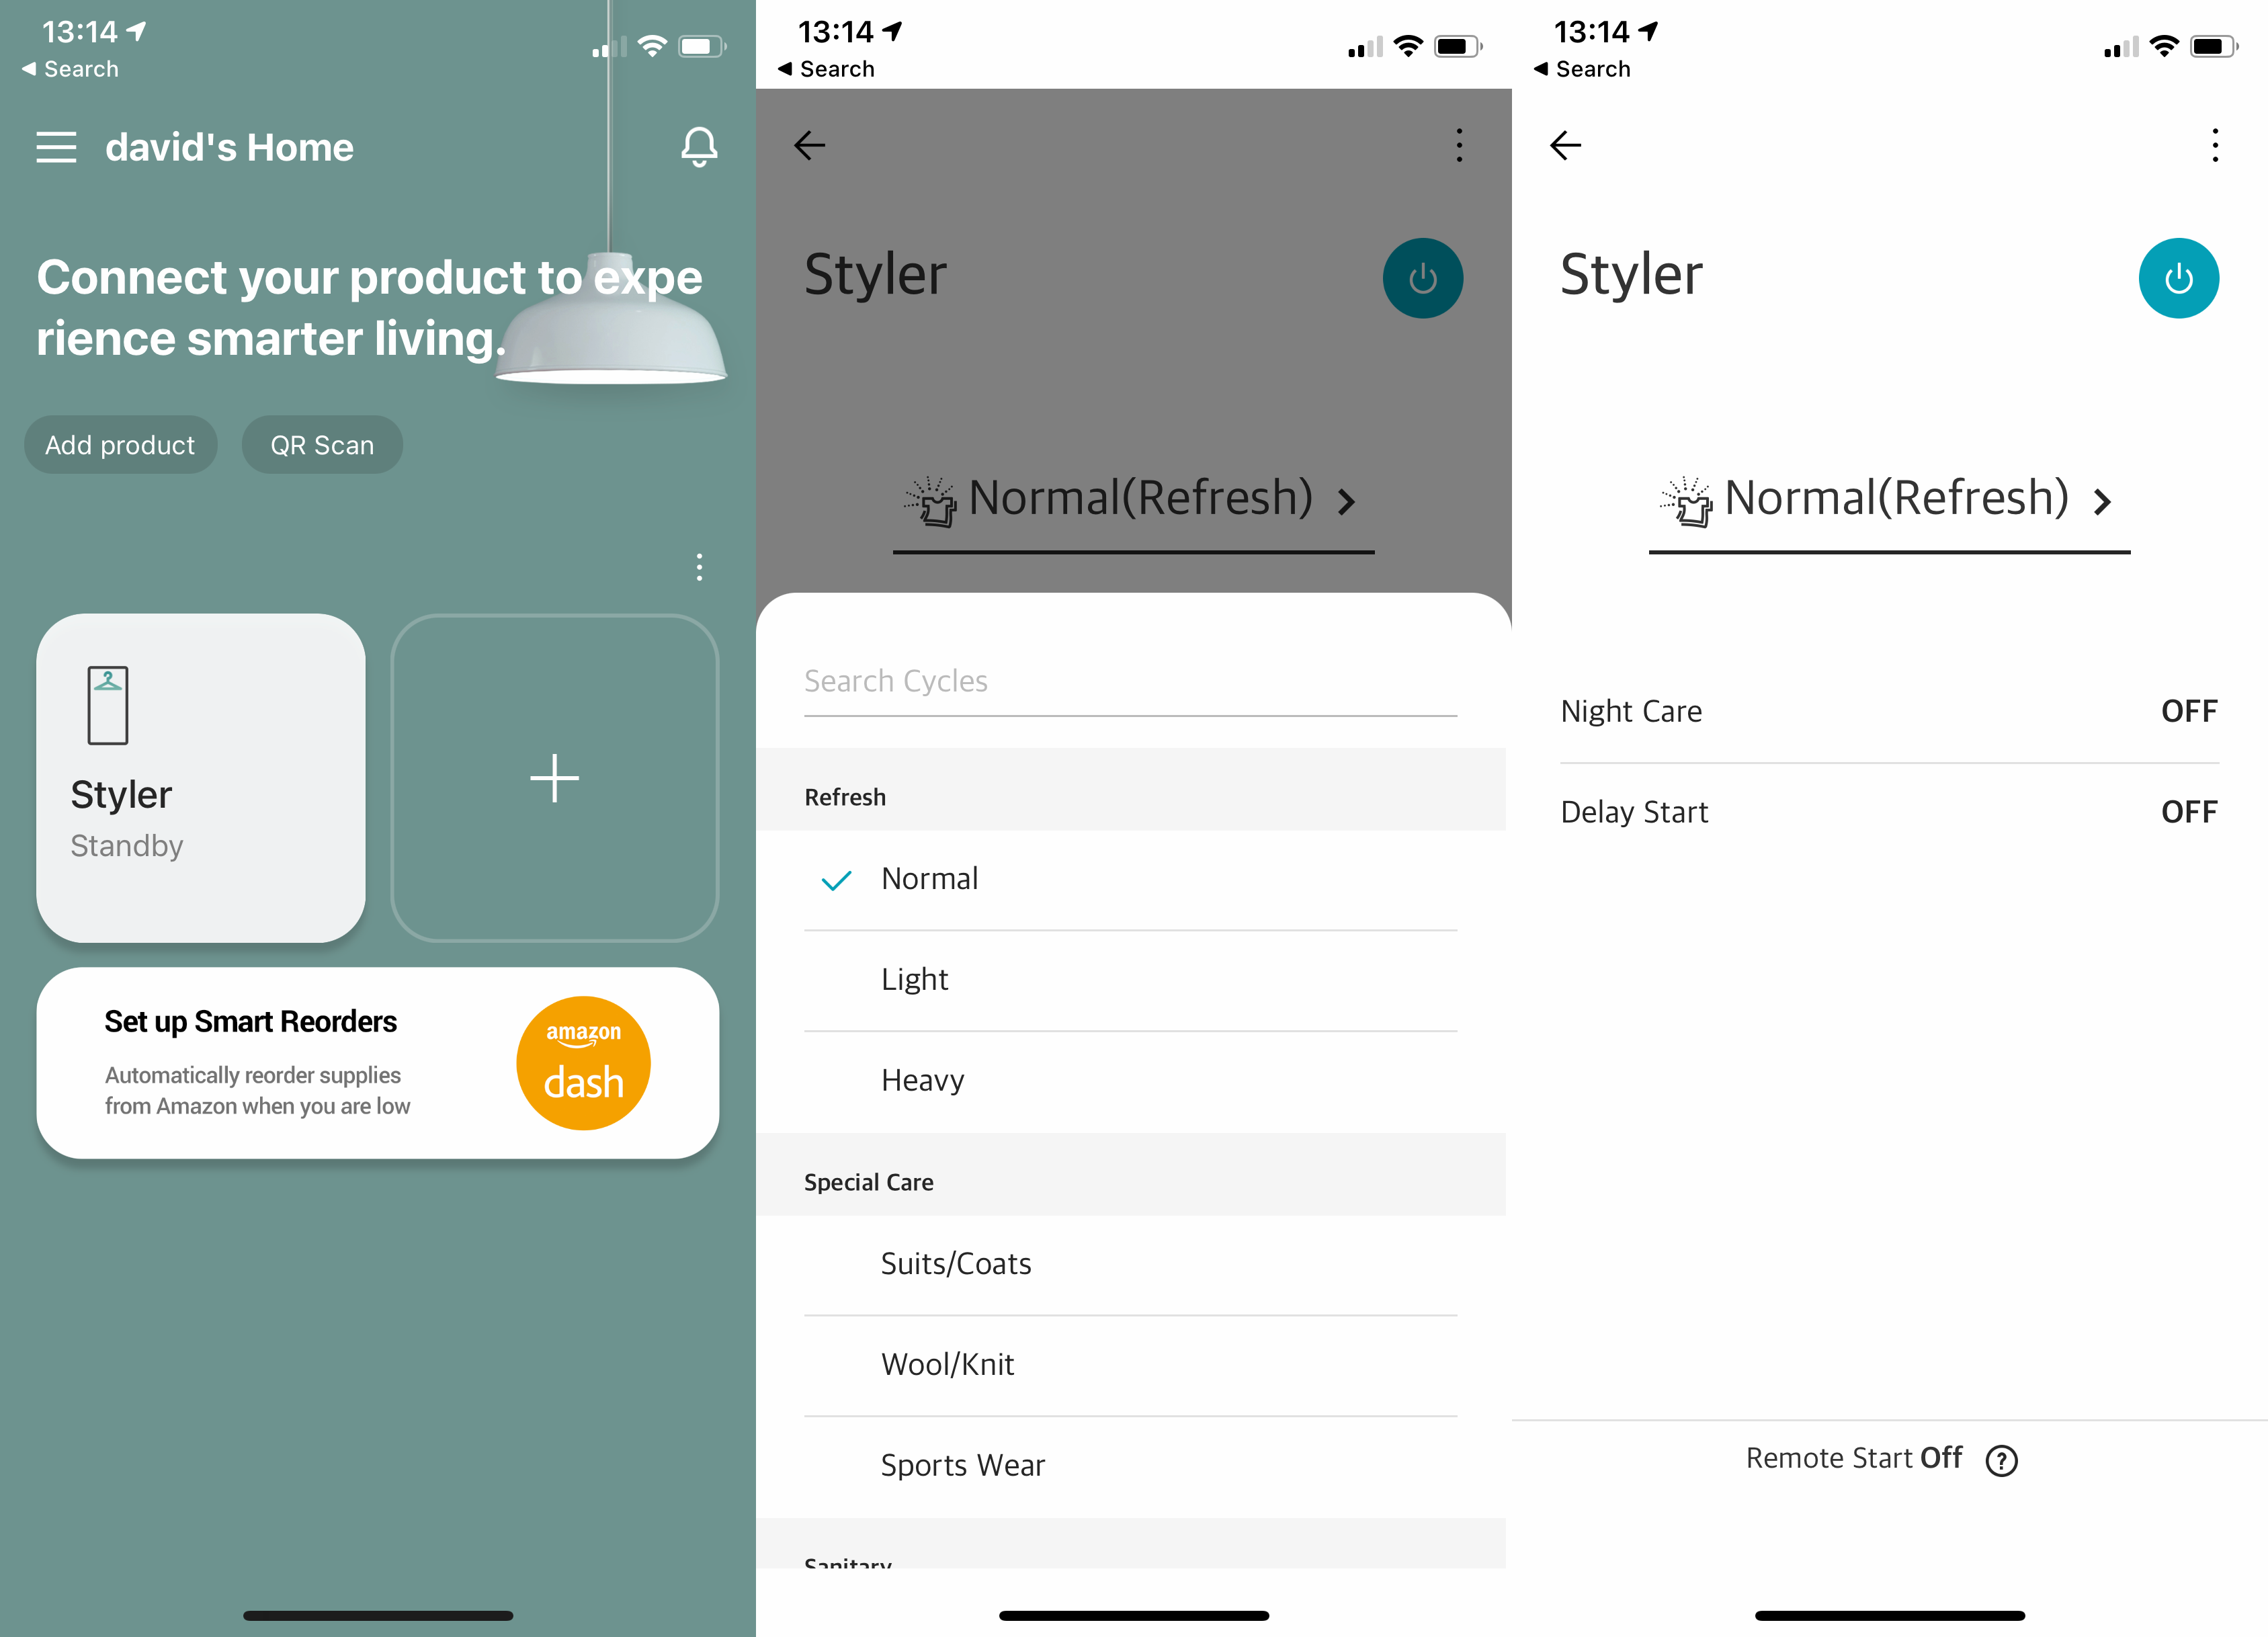 Screenshots from LG's styler application's settings about refresh and night care